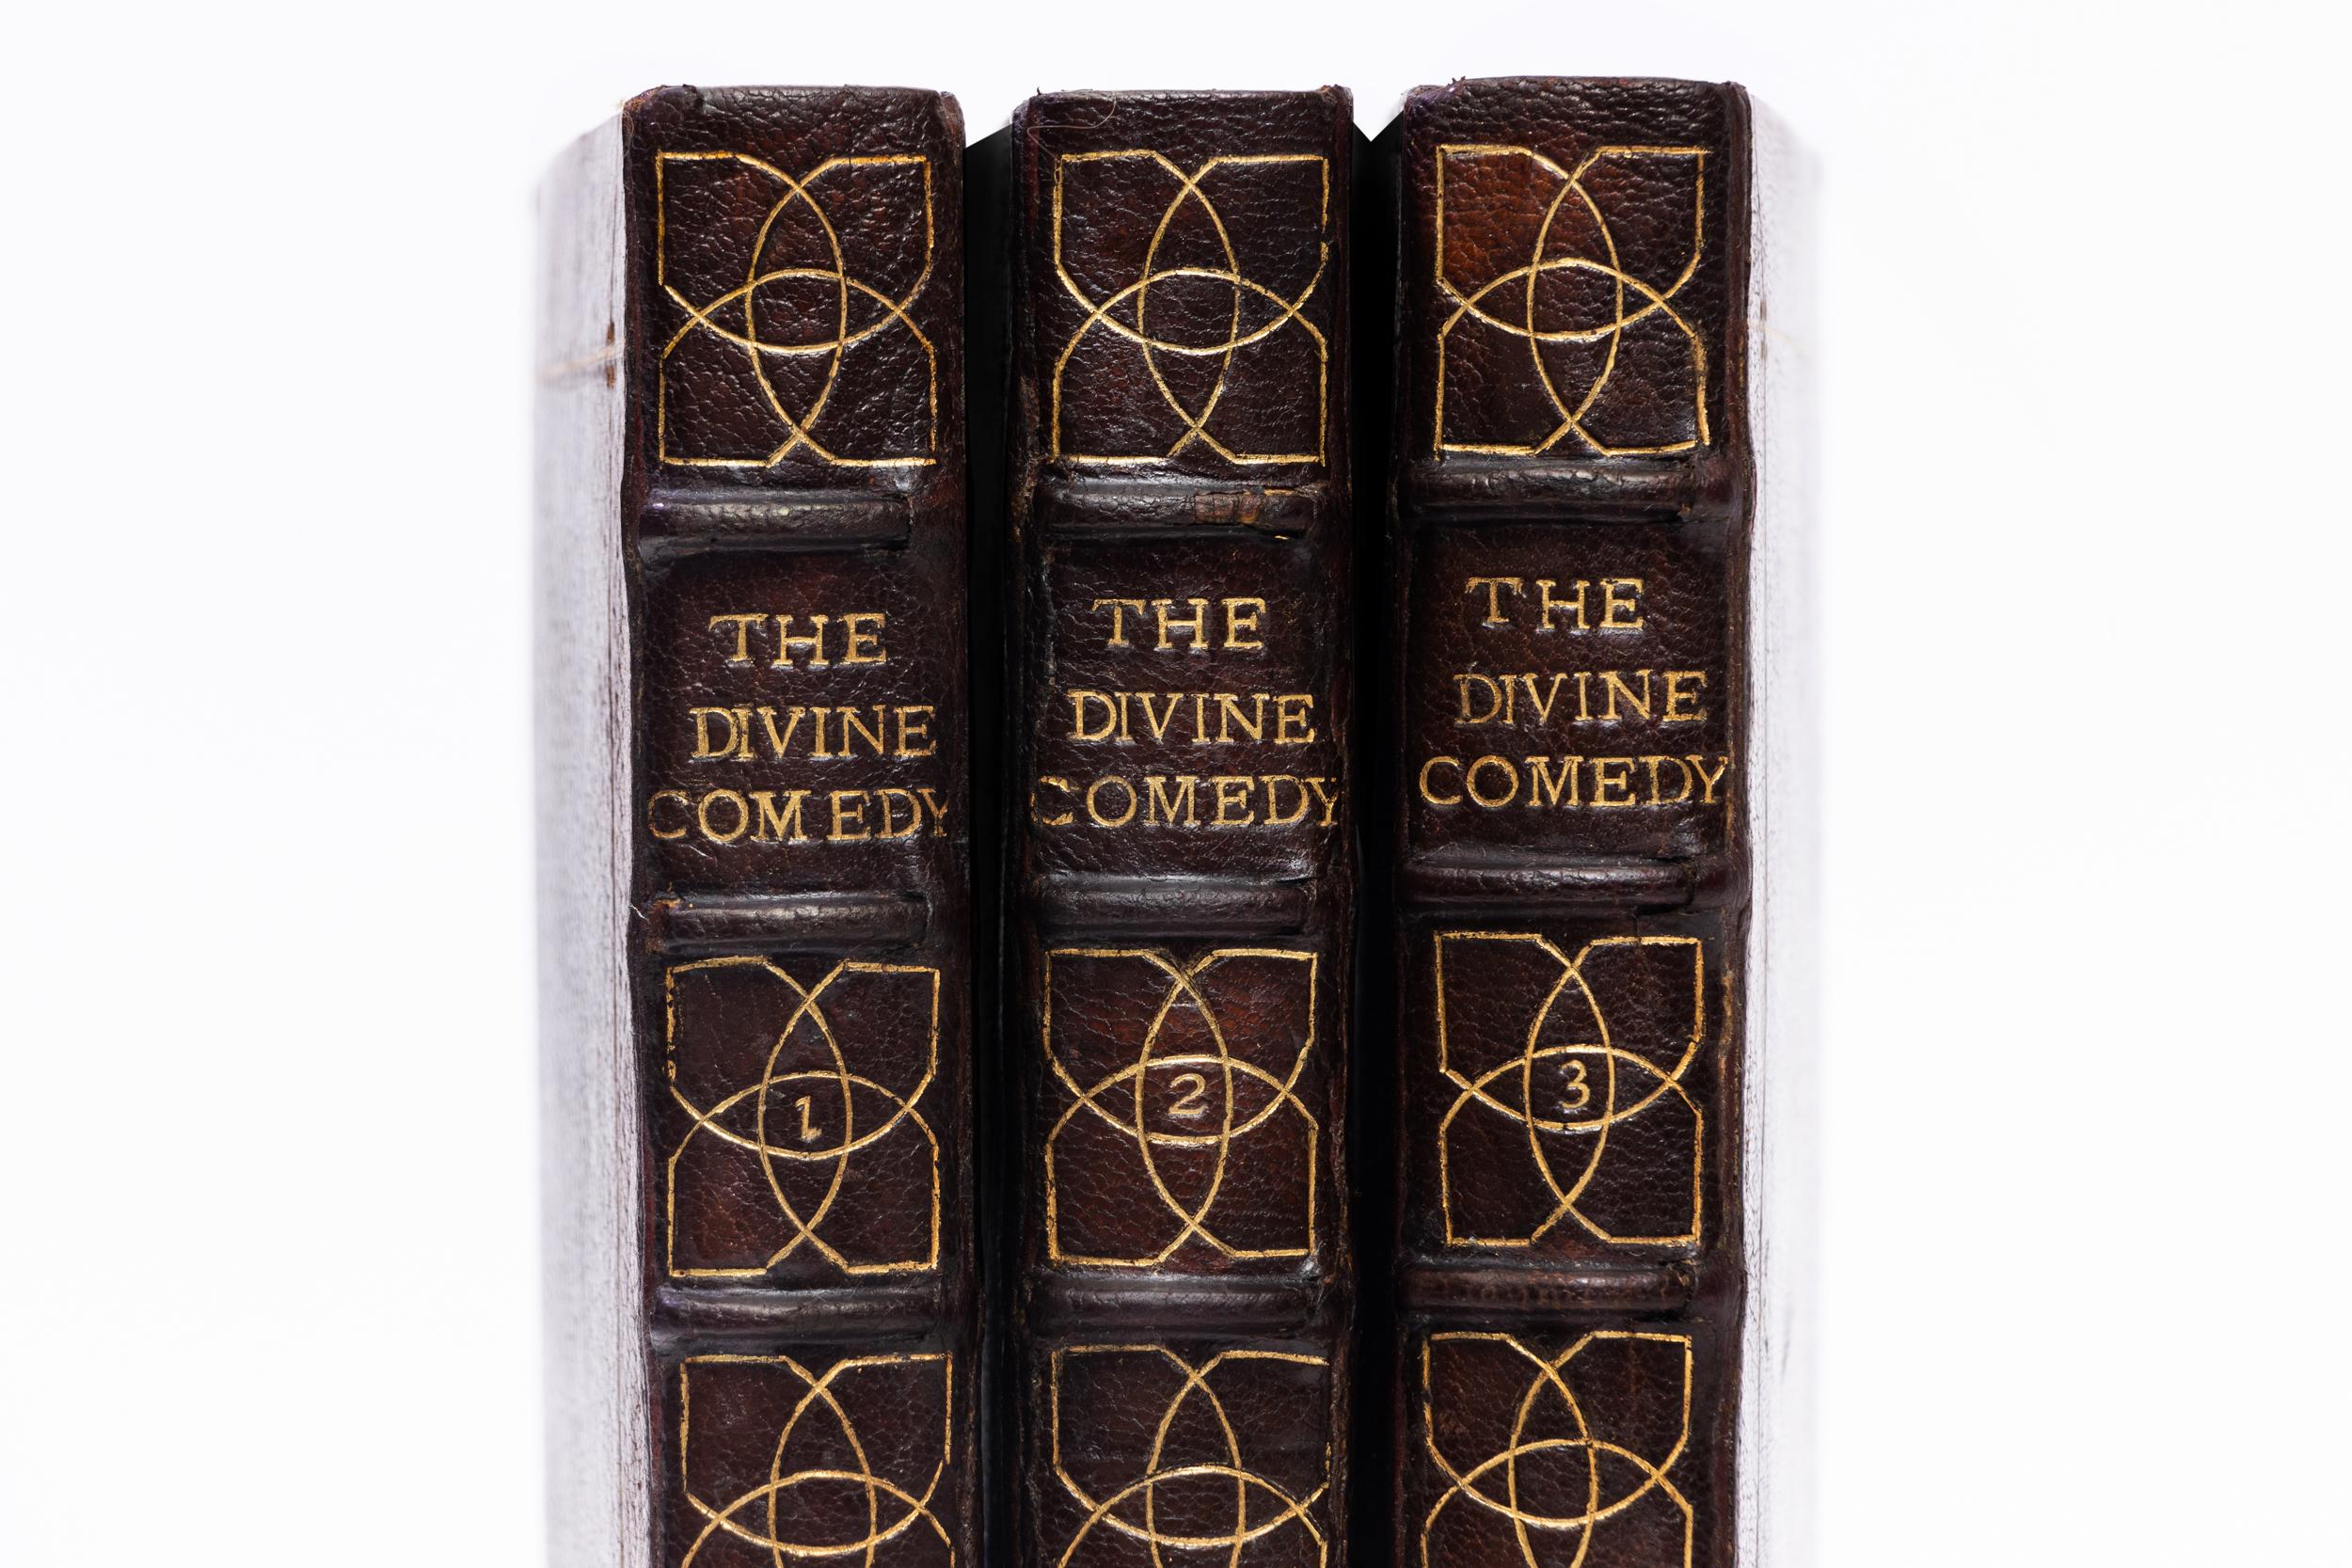 3 Volumes. Dante Alighieri, The Divine Comedy. Bound in full brown morocco. Gilt tooling on covers. Raised bands. Decorative gilt tooled symbols on spines. All edges colored in green. Illustrated. Translated by Charles Eliot Norton. Published: New